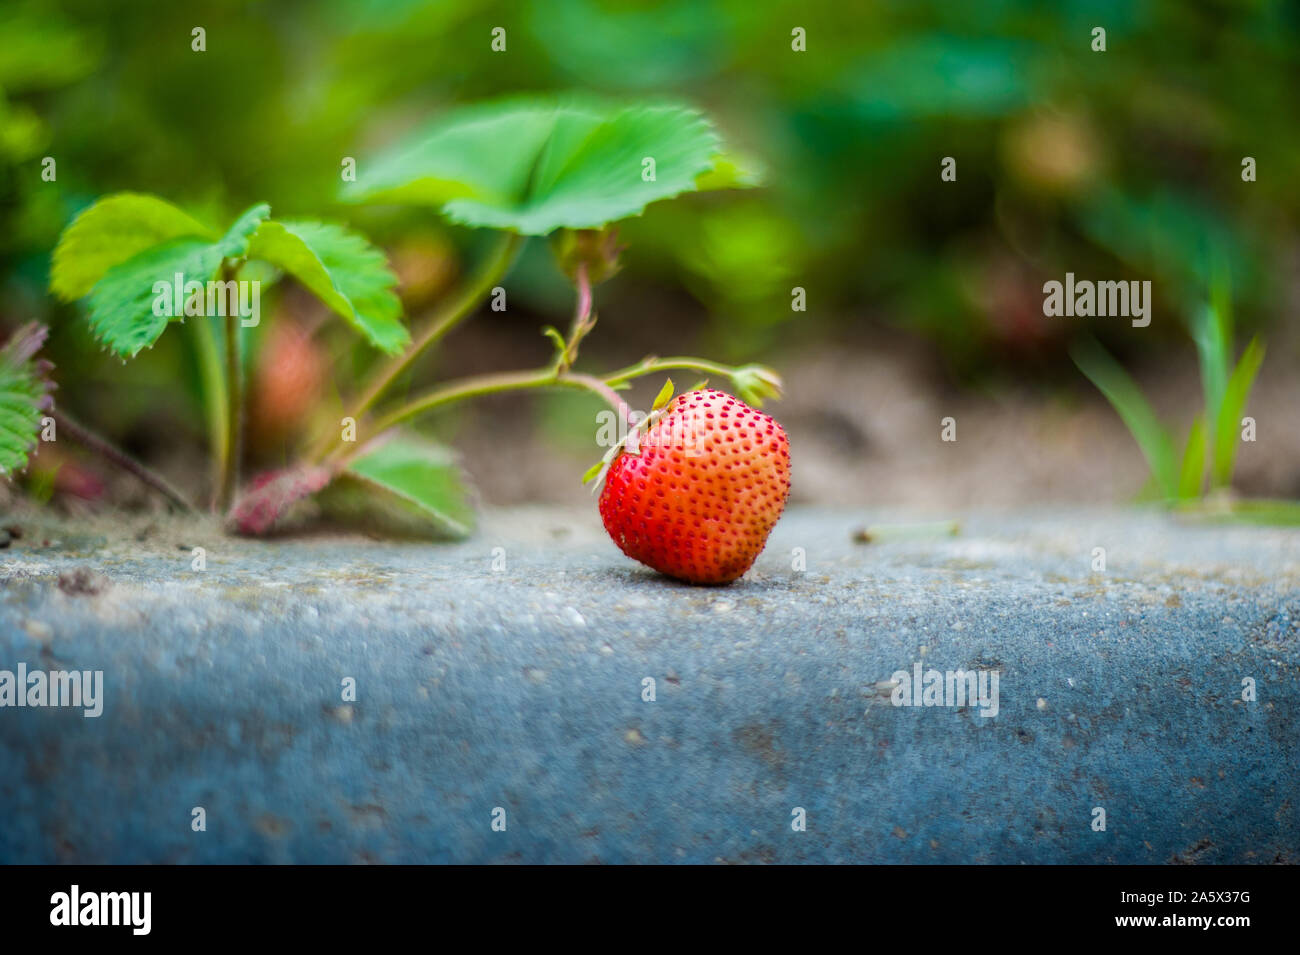 Closeup three ripes strawberry Fragaria viridis on the bush. Strawberry with green blurred leaves outdoors Stock Photo